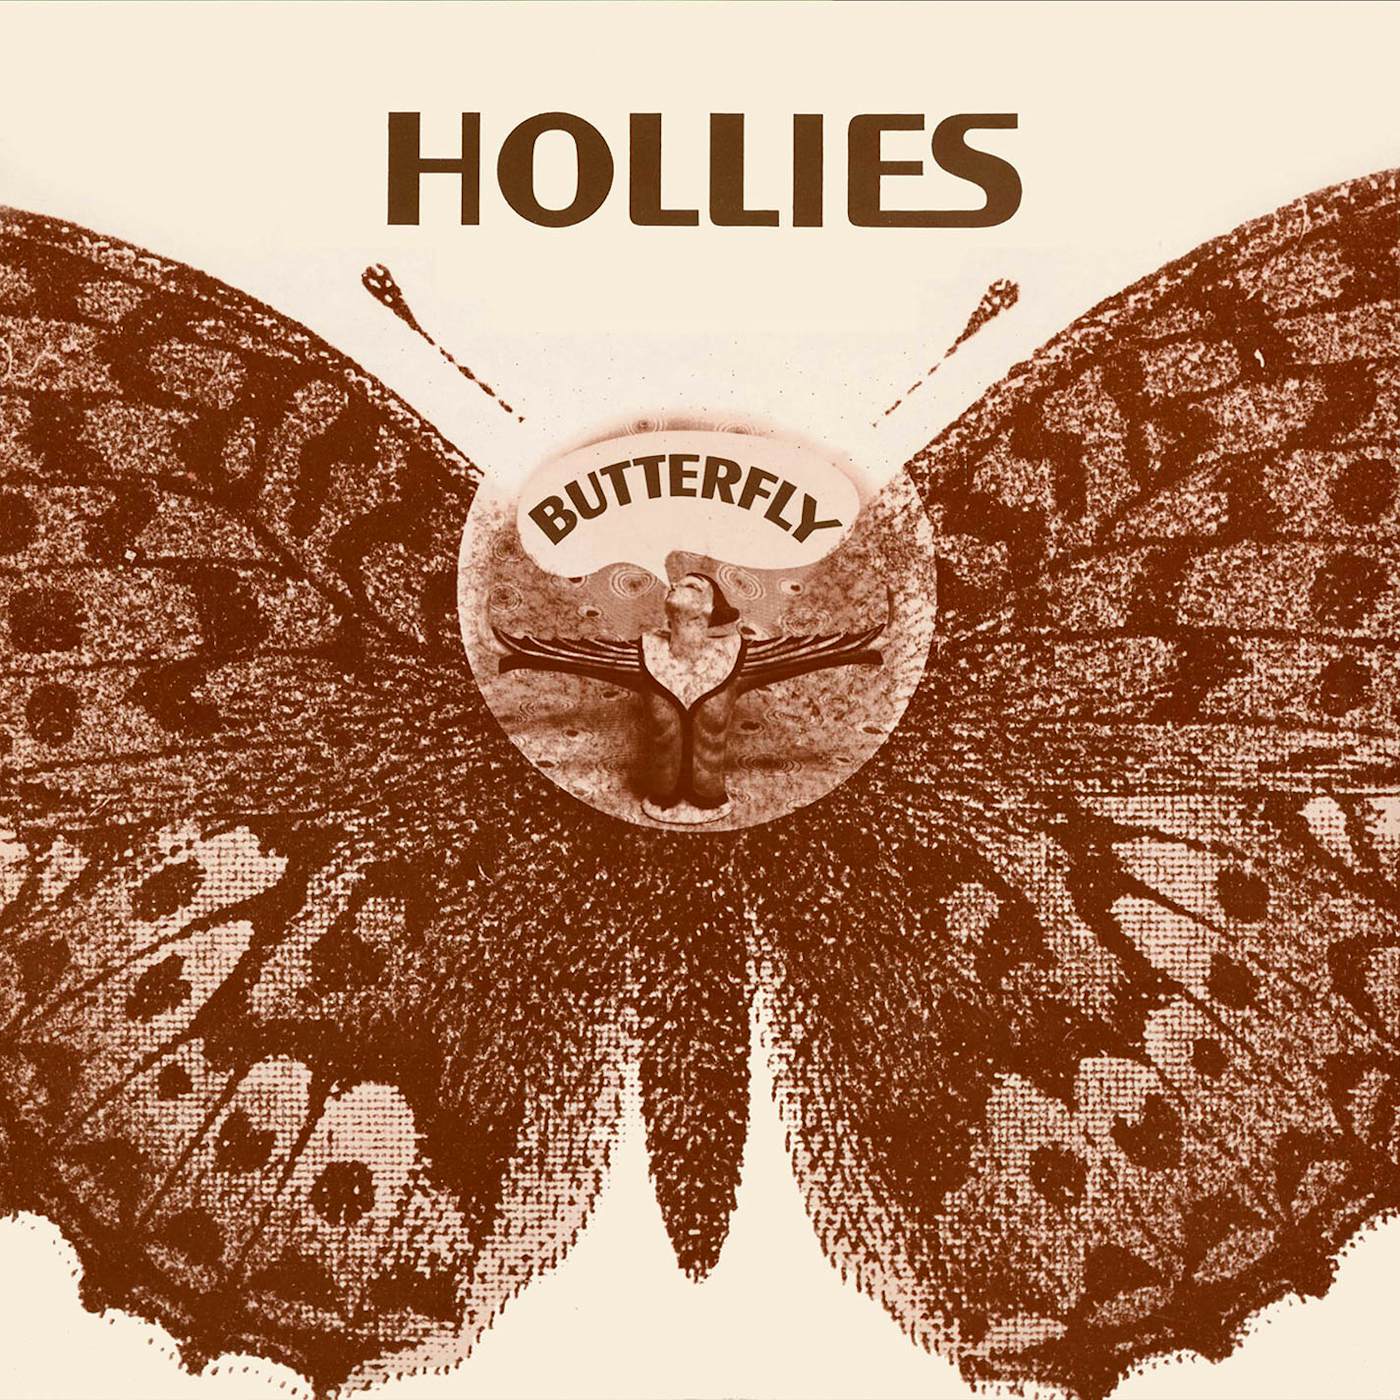 The Hollies Butterfly Vinyl Record